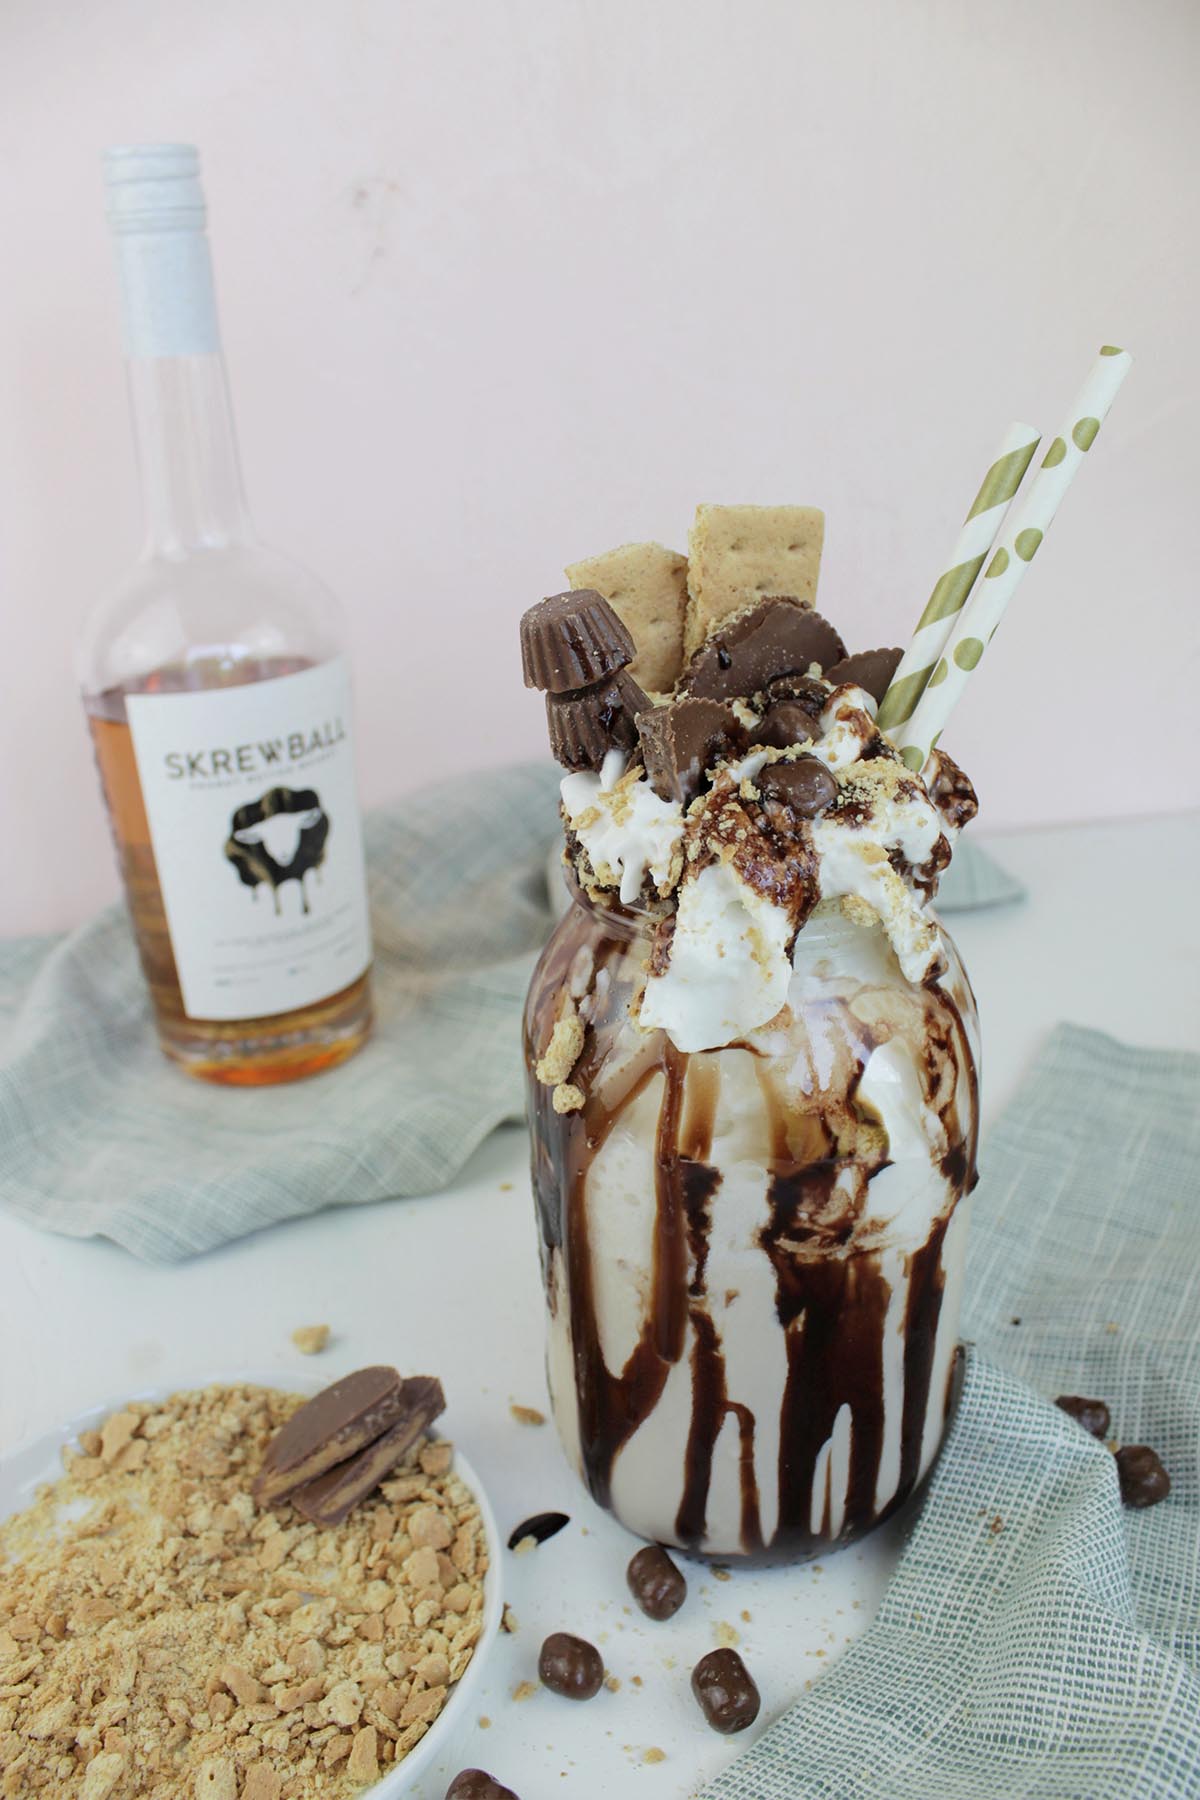 skrewball milkshake with chocolate with toppings